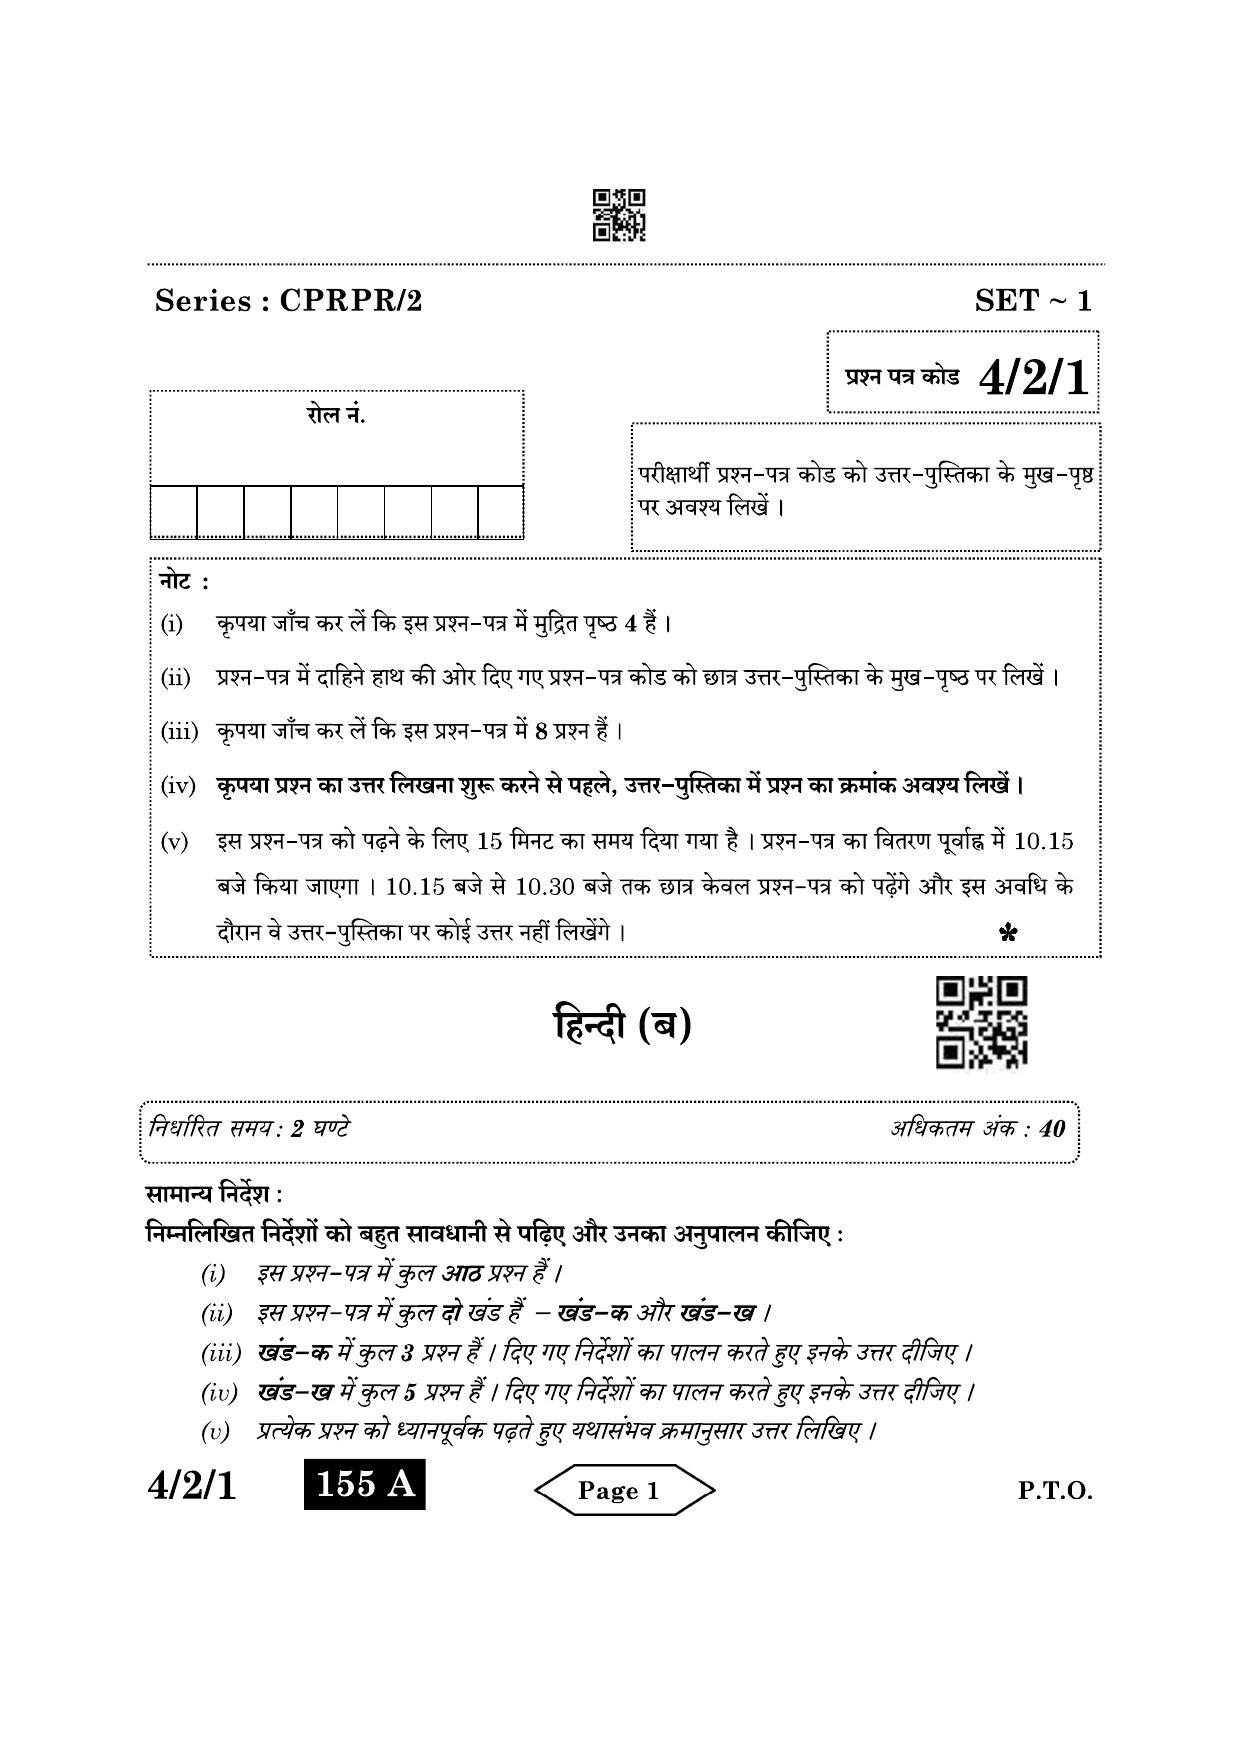 CBSE Class 10 4-2-1 Hindi B 2022 Question Paper - Page 1